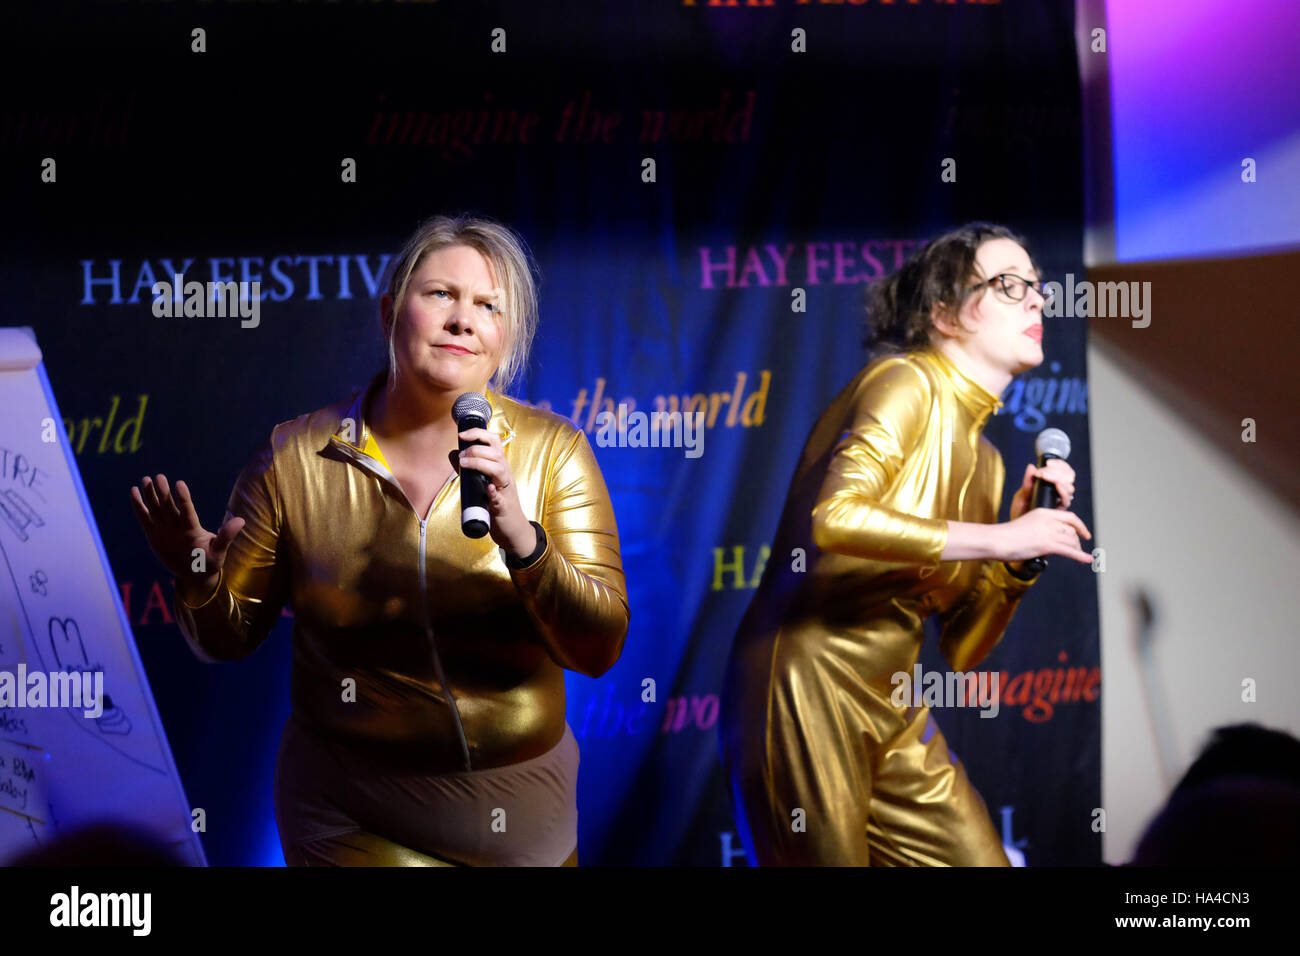 Hay on Wye, Wales, UK - Saturday 26th November 2016 - The Scummy Mummies comedy duo ( Helen Thorn on left  and Ellie Gibson on right ) perform on stage at the Hay Festival Winter Weekend. Photo Steven May / Alamy Live News Stock Photo